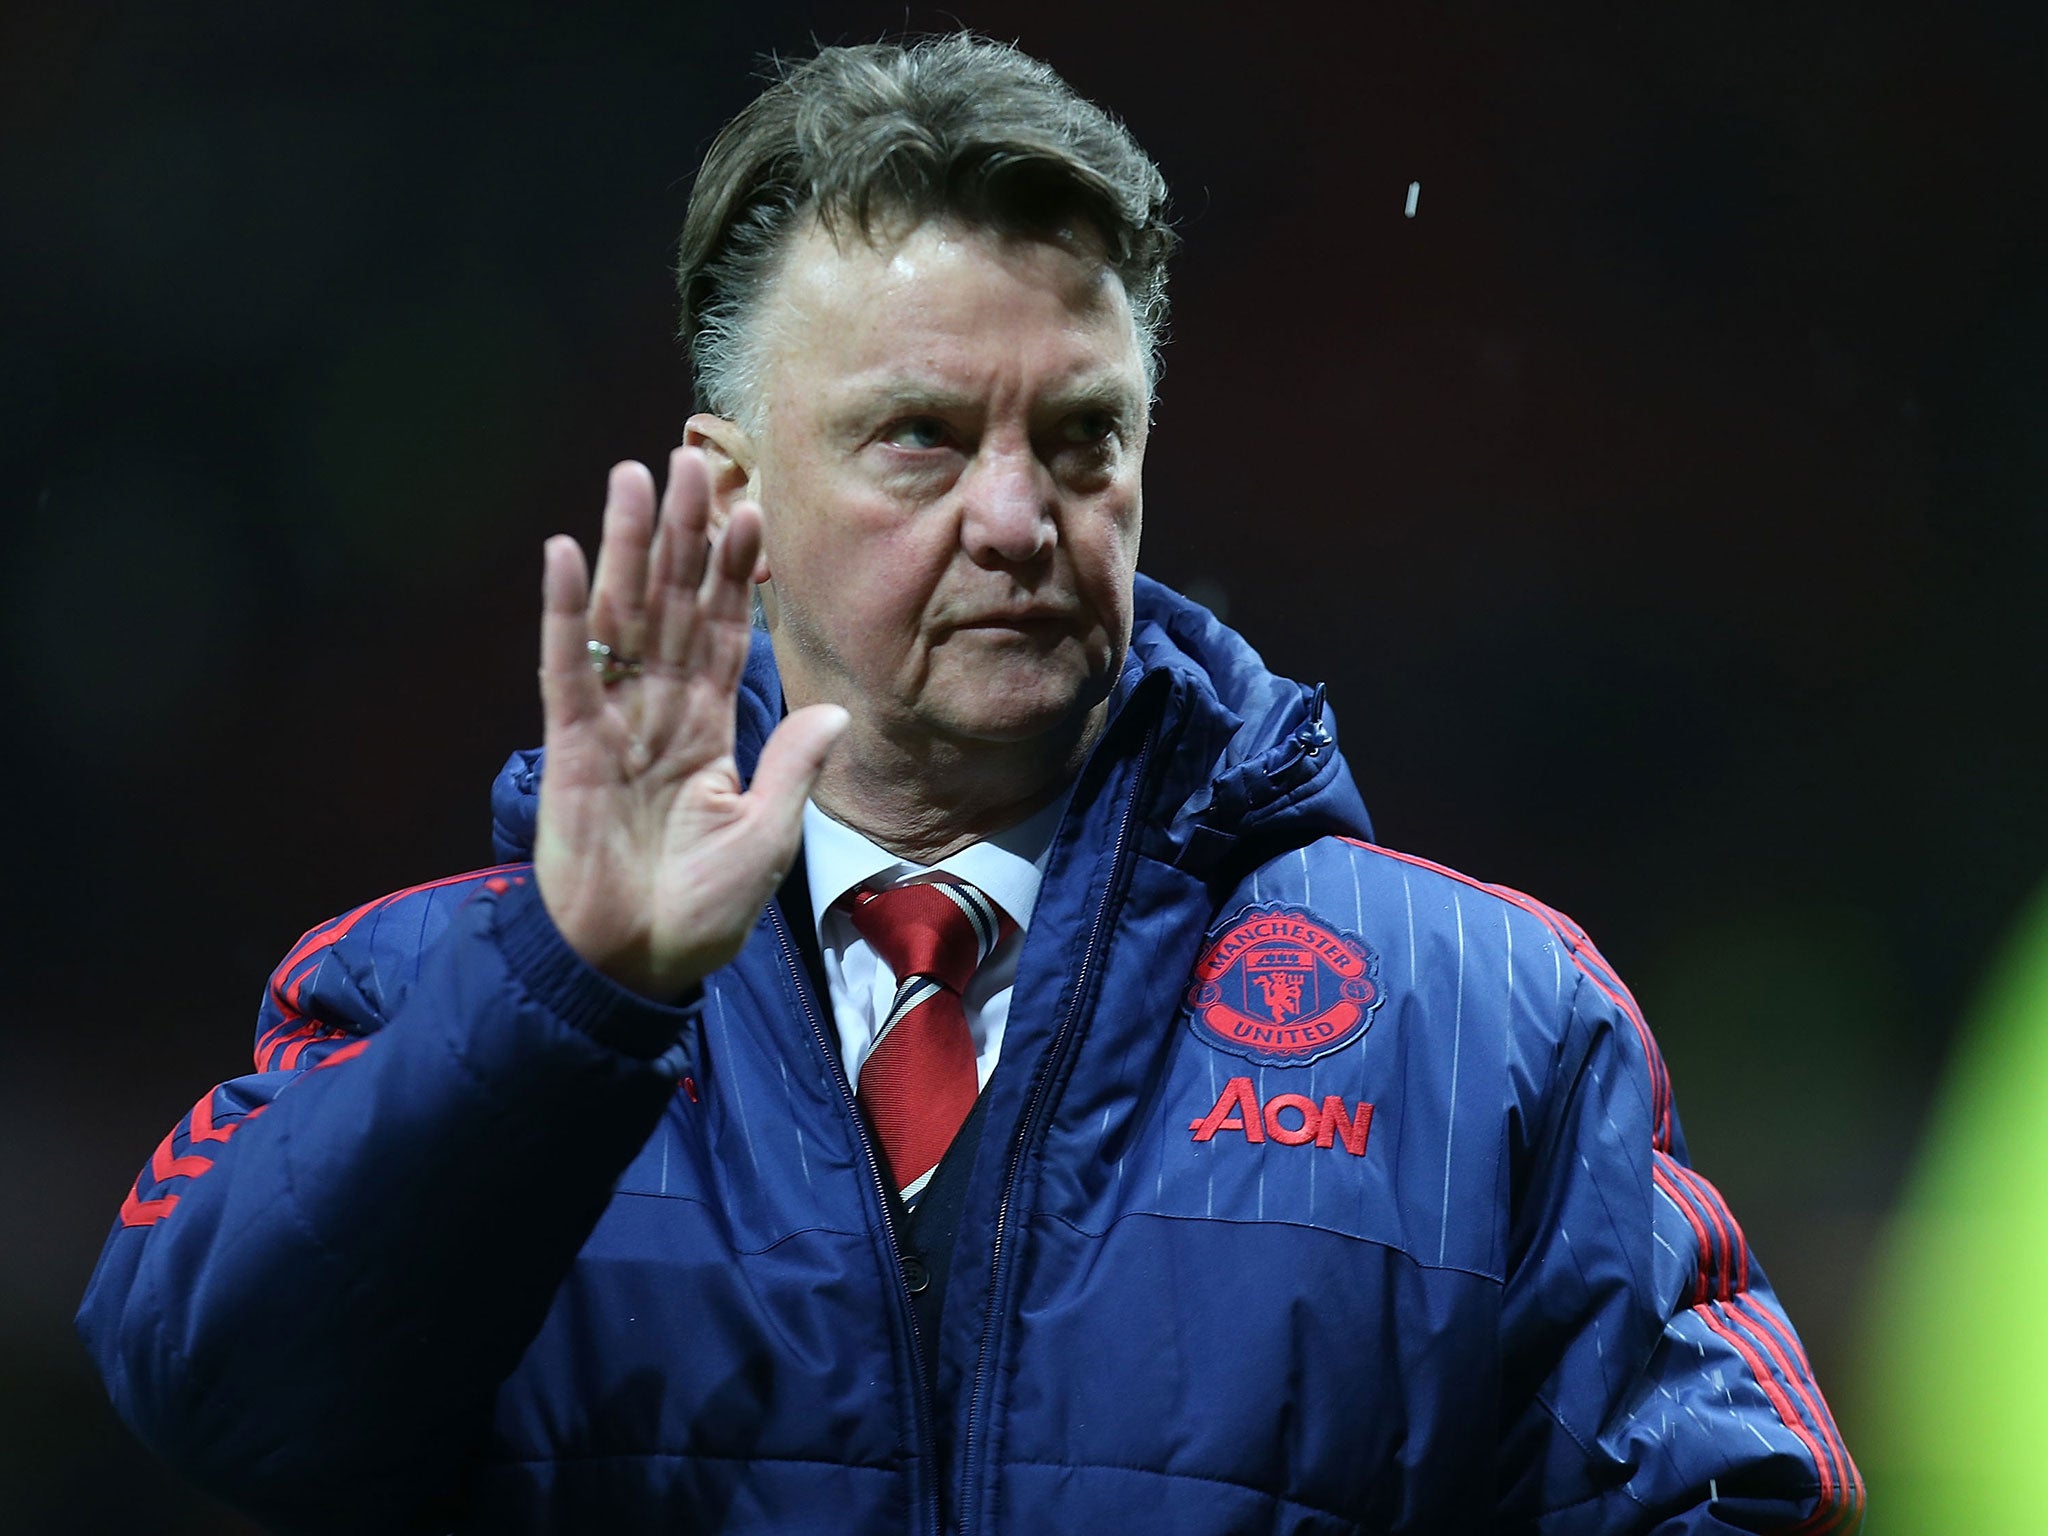 Manchester United manager Louis van Gaal waves to the fans after the 3-0 win over Stoke